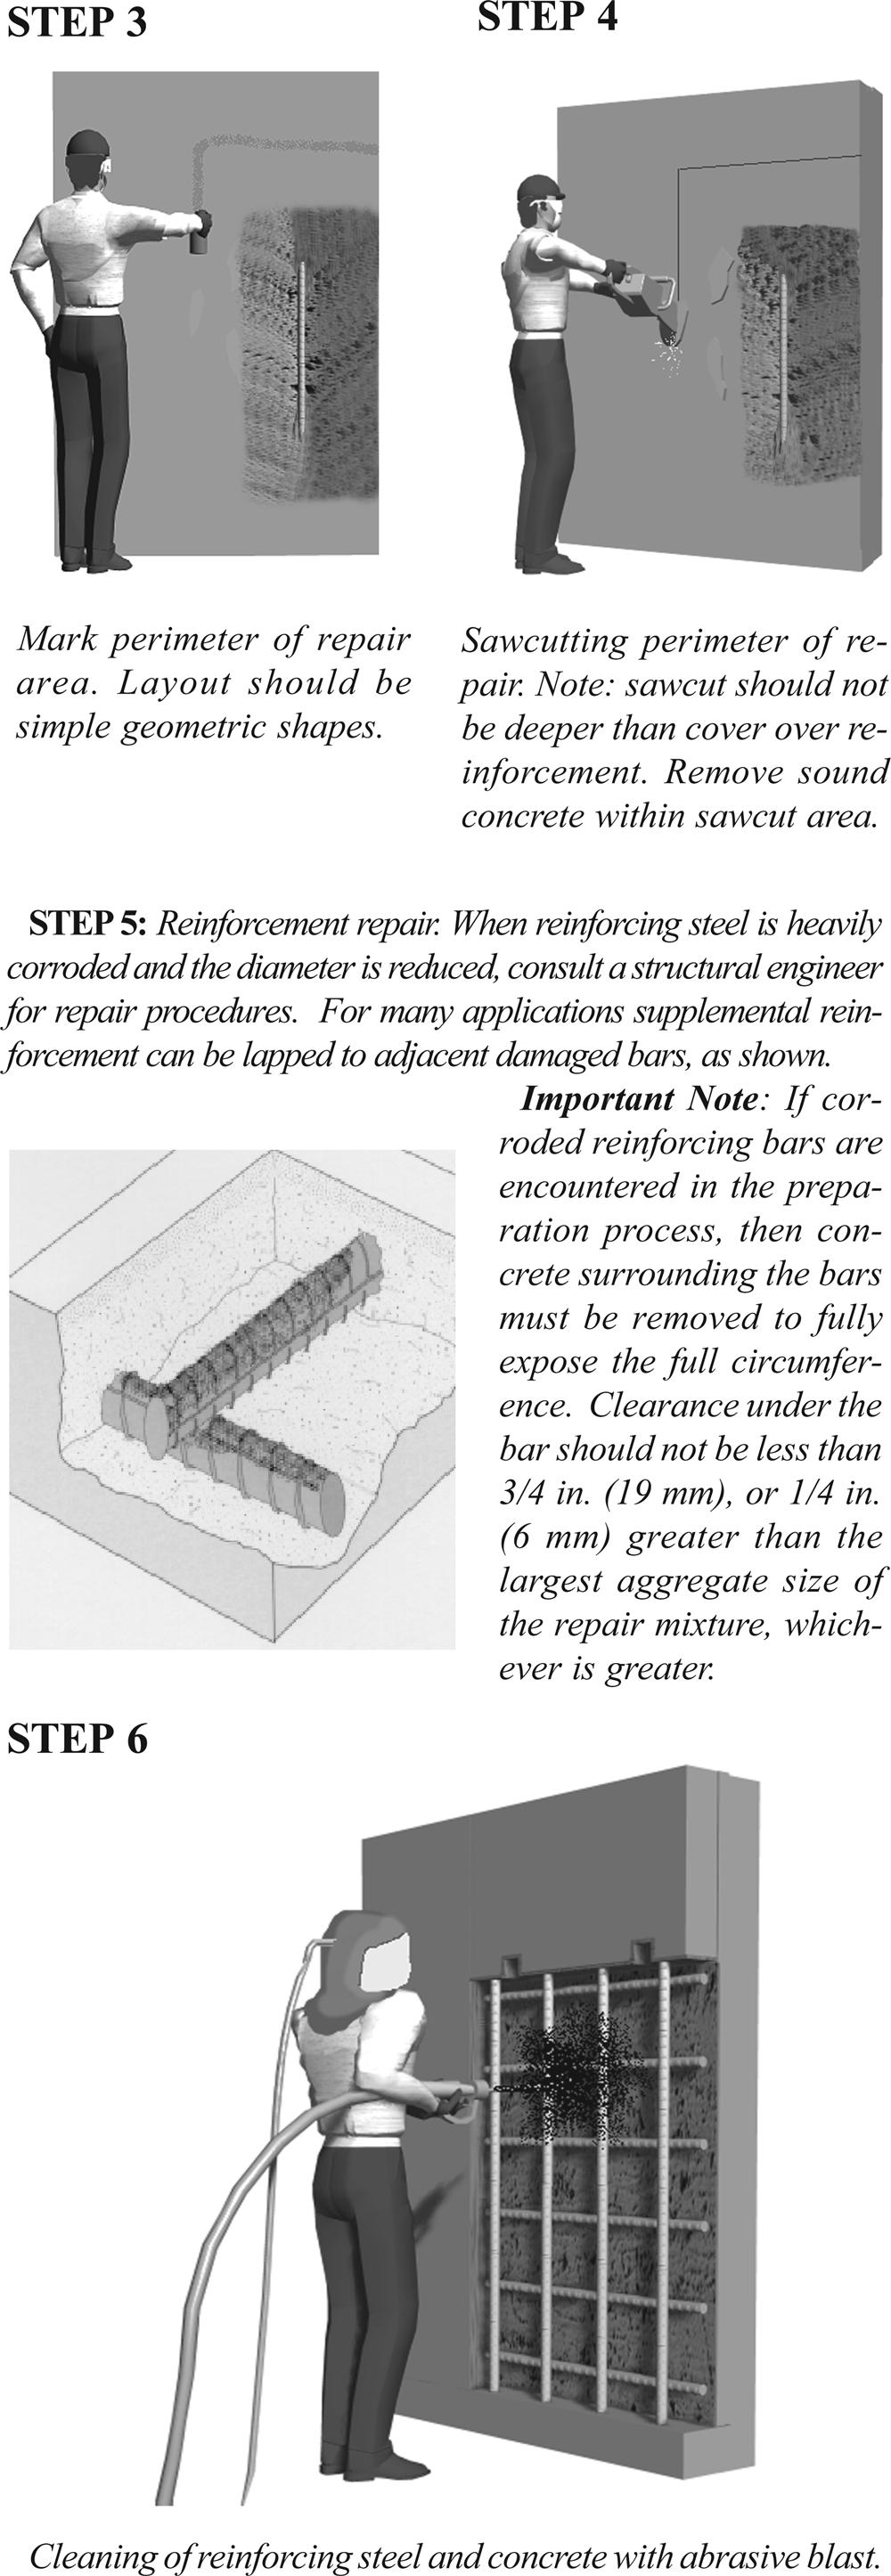 For many applications, supplemental reinforcement can be lapped to adjacent damaged bars, as shown (see Fig. 2). Step 6 Clean reinforcing steel and concrete with abrasive blasting.